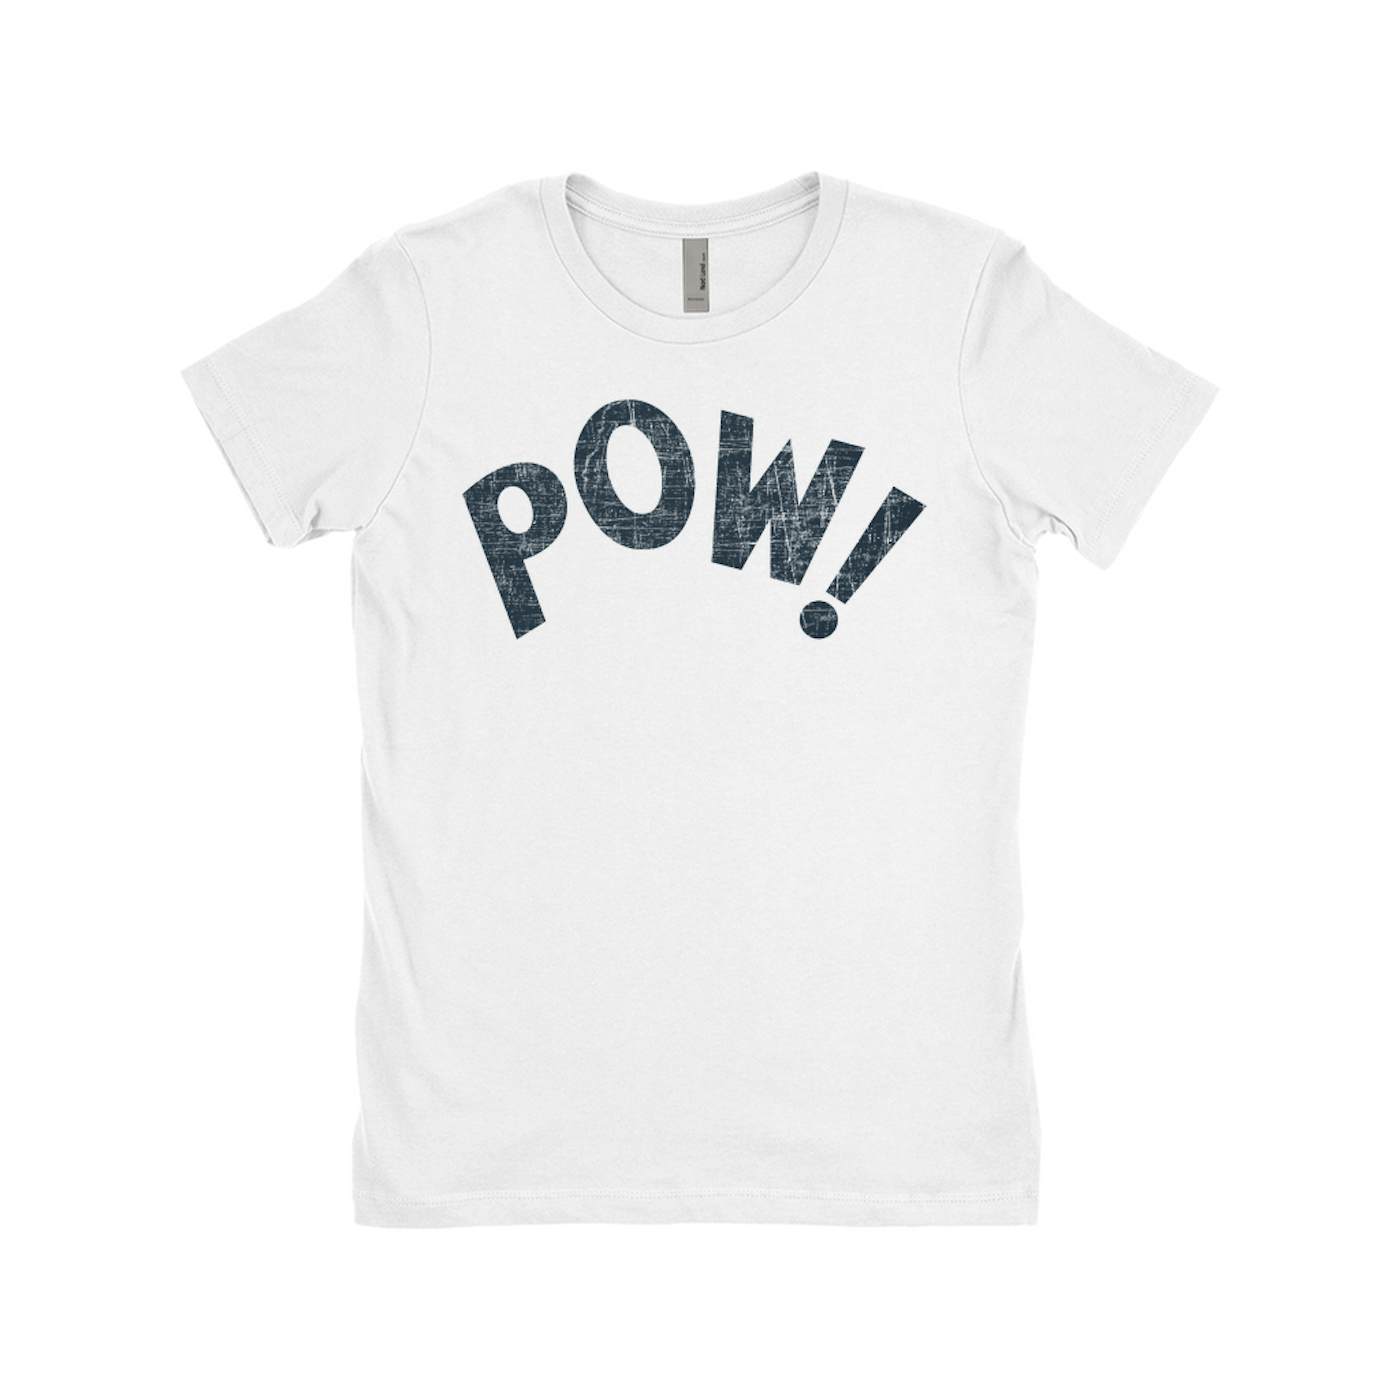 The Who Ladies' Boyfriend T-Shirt | POW! Worn By Keith Moon The Who Shirt